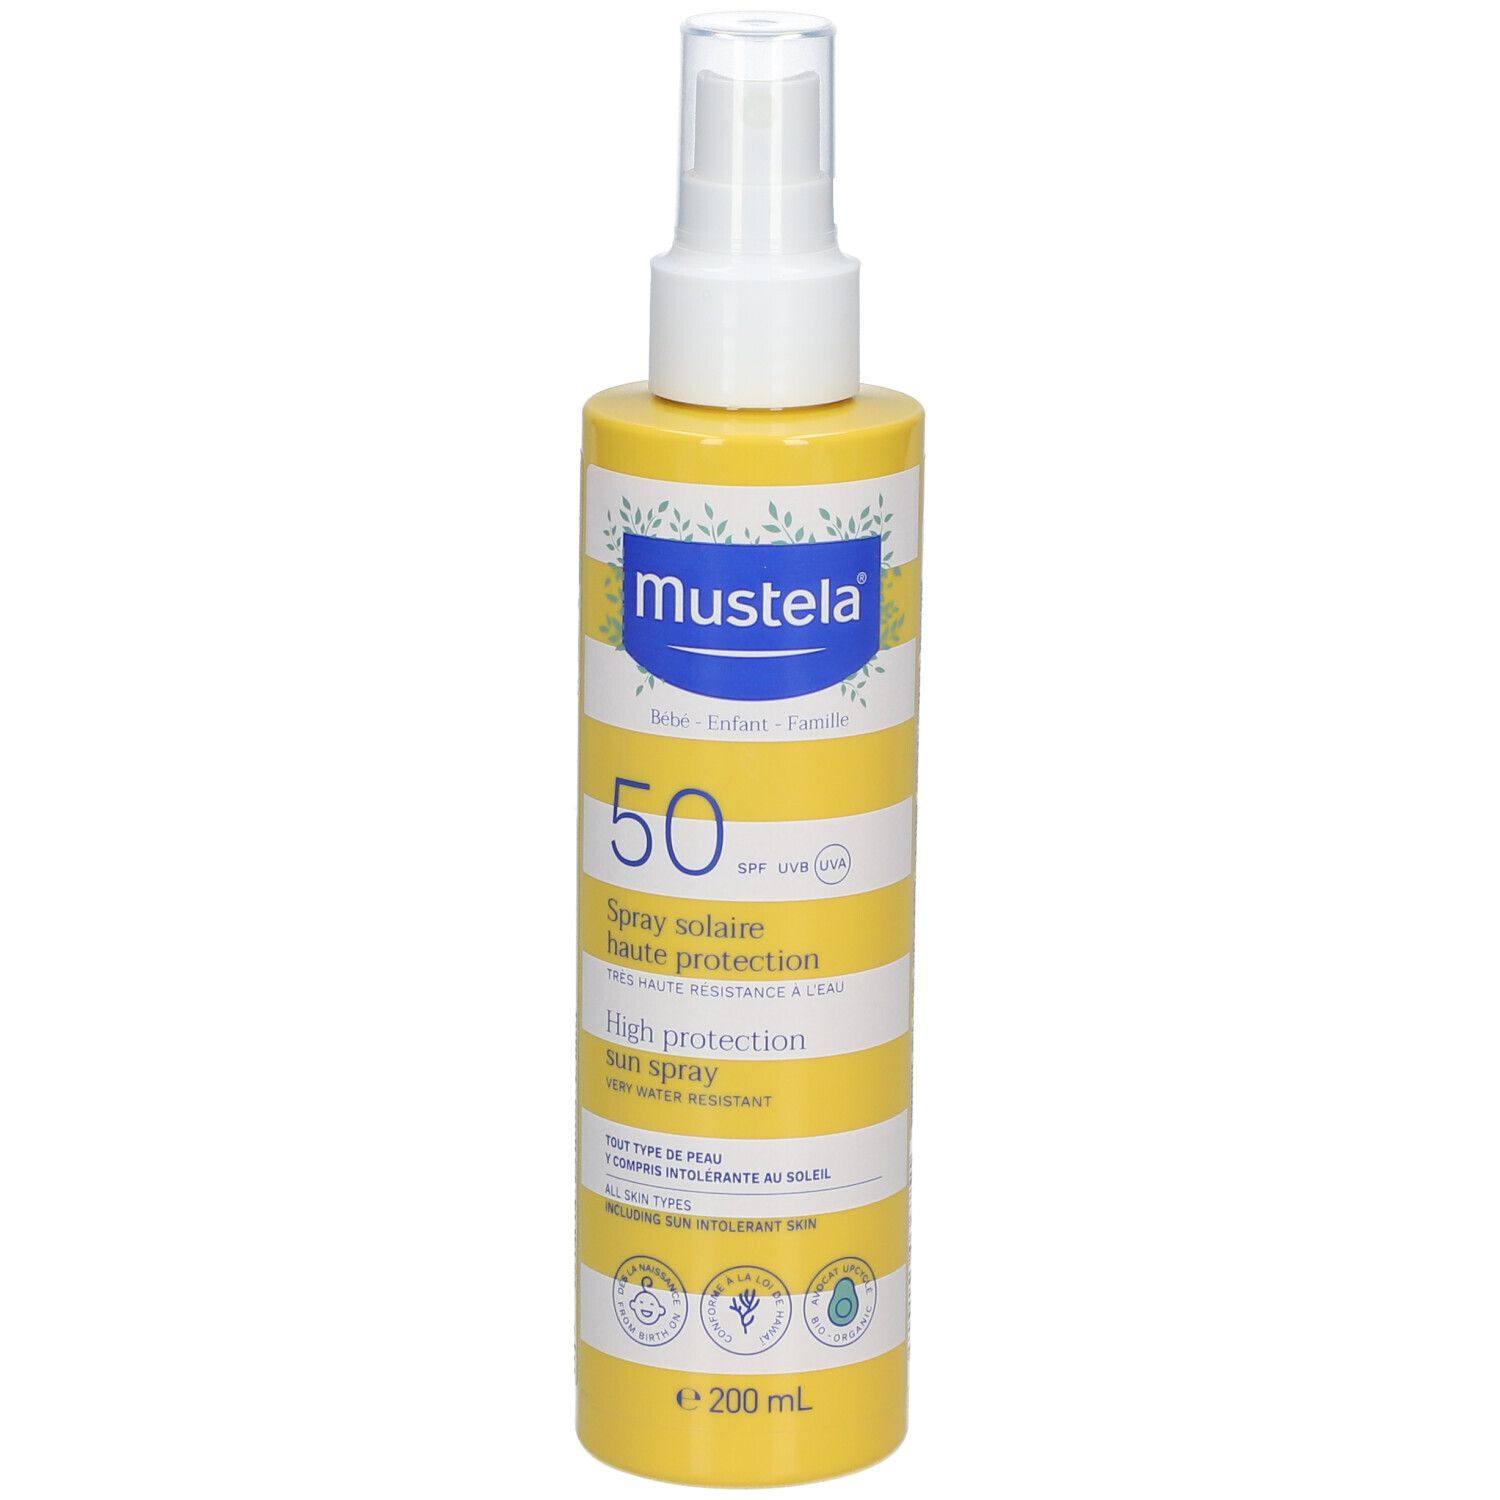 mustela® Spray Solaire haute protection SPF 50